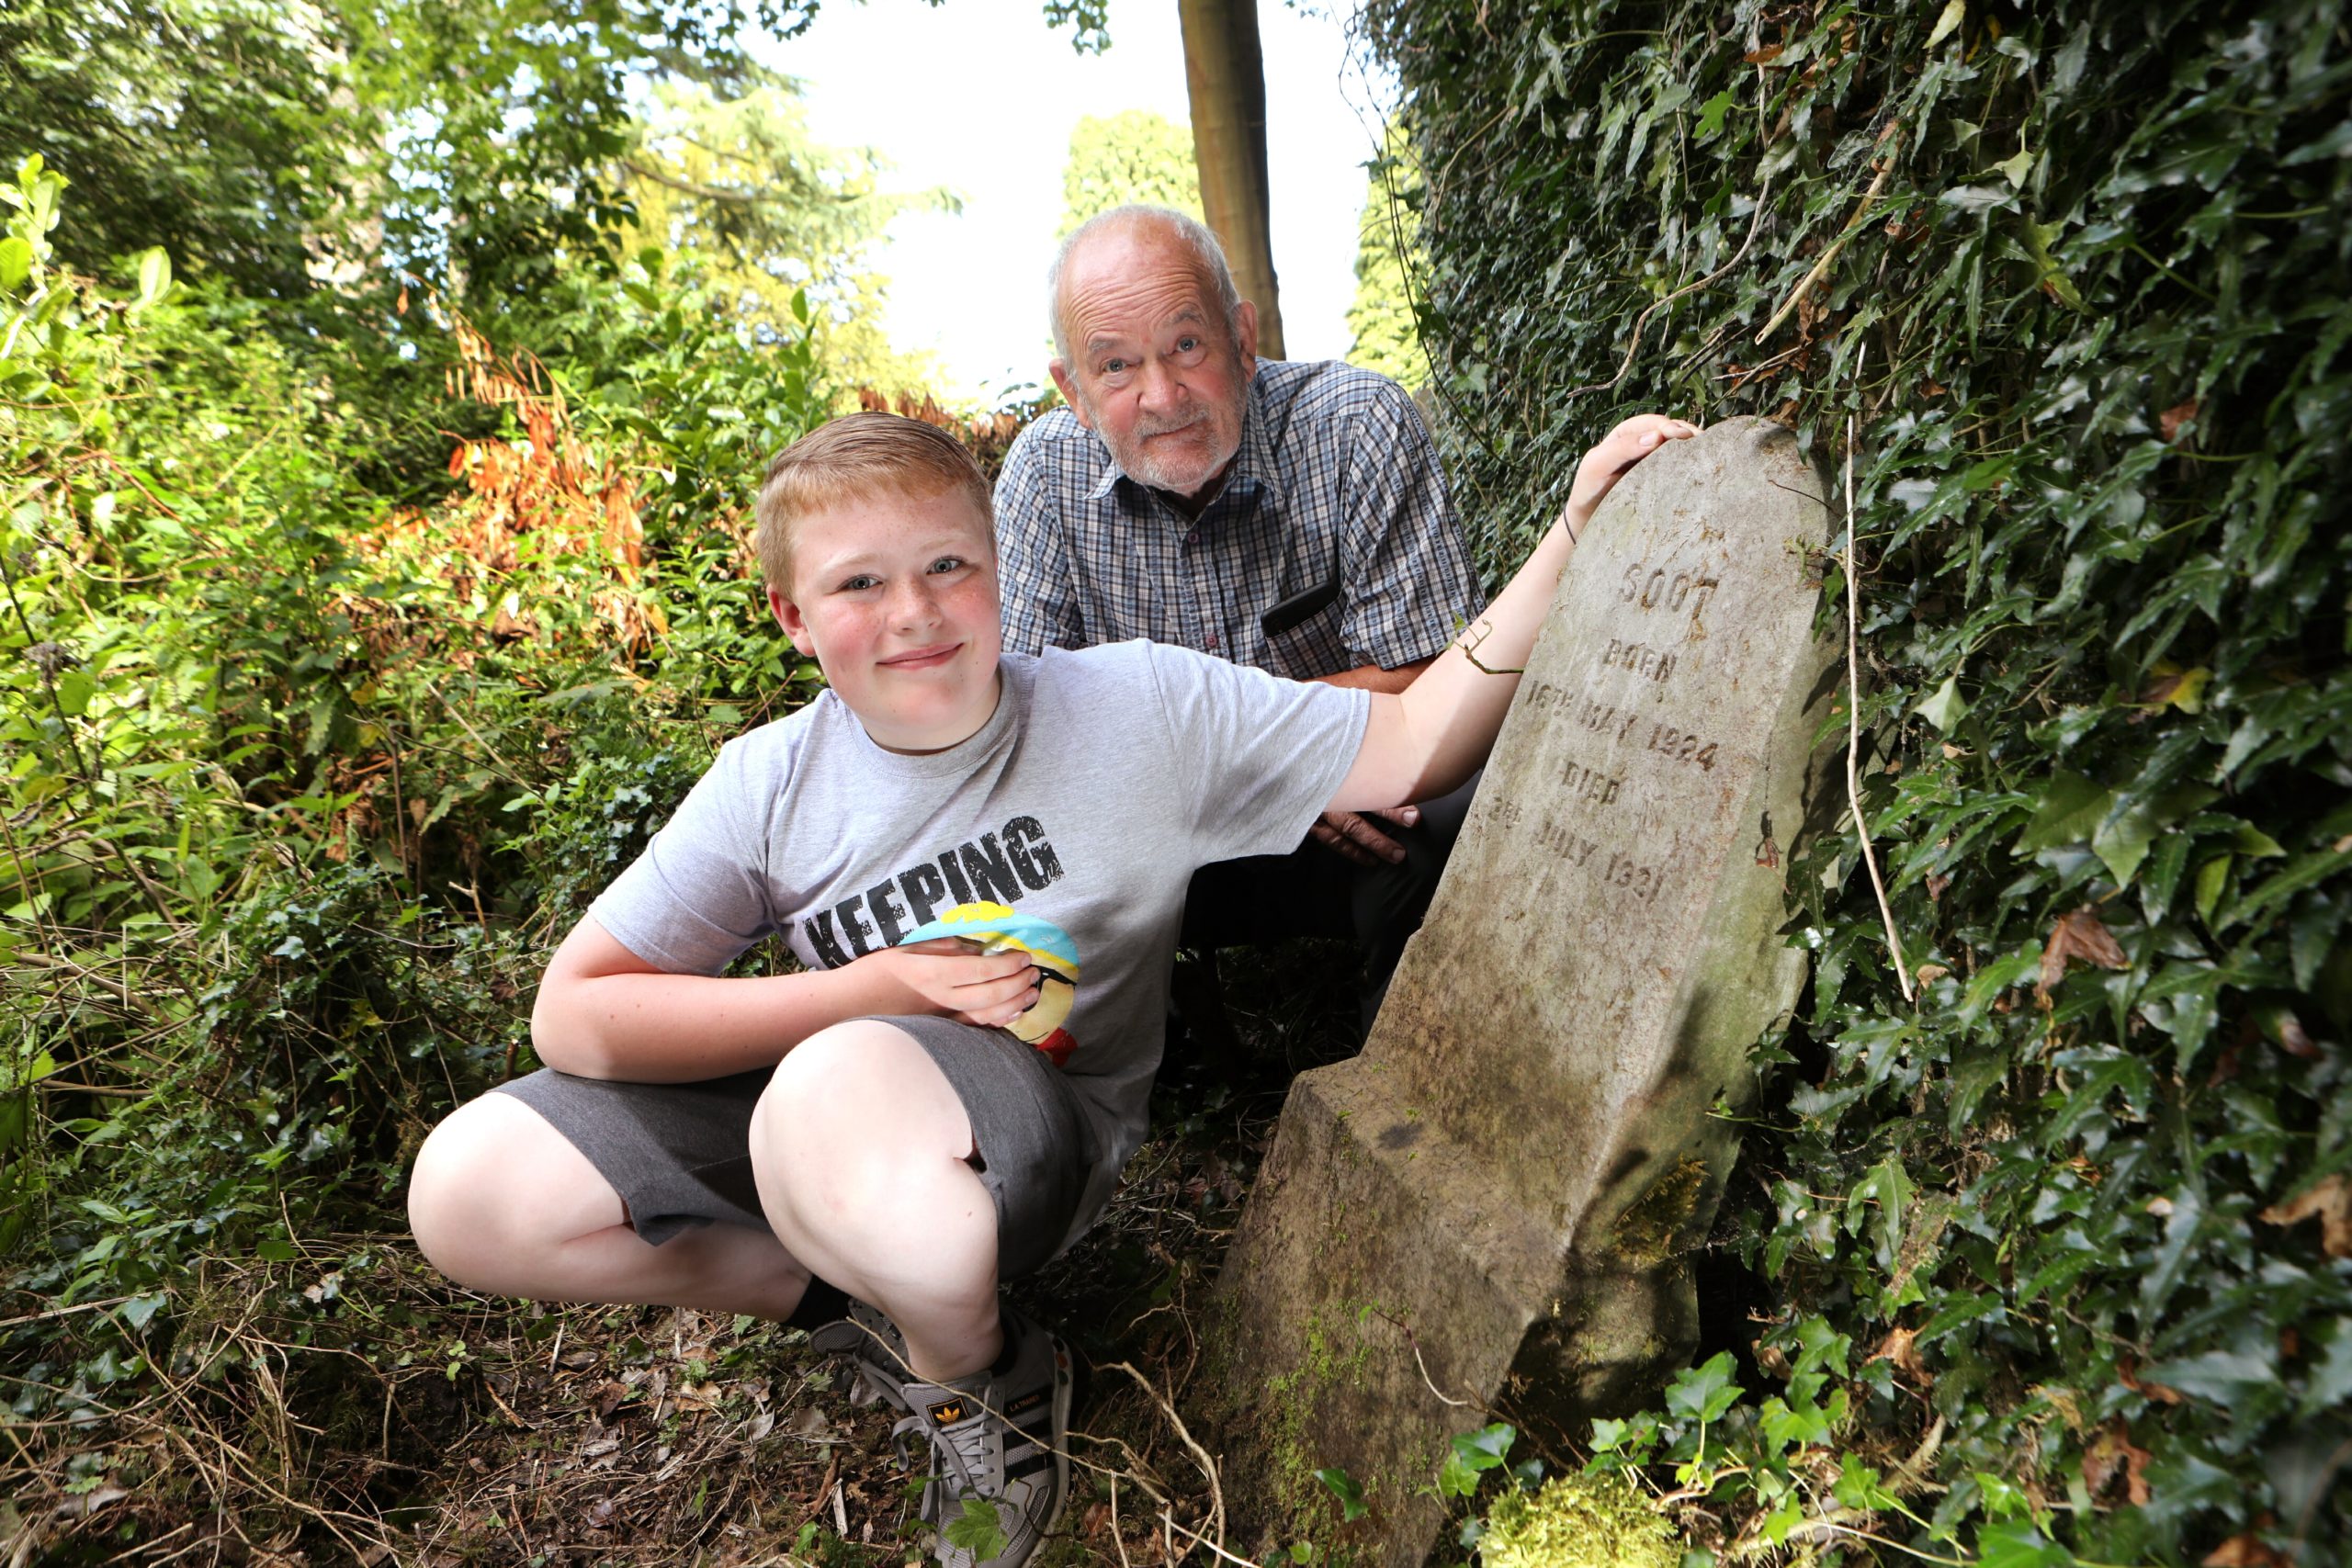 Frank McCafferty with grandson Jed at the pet cemetery that they discovered.